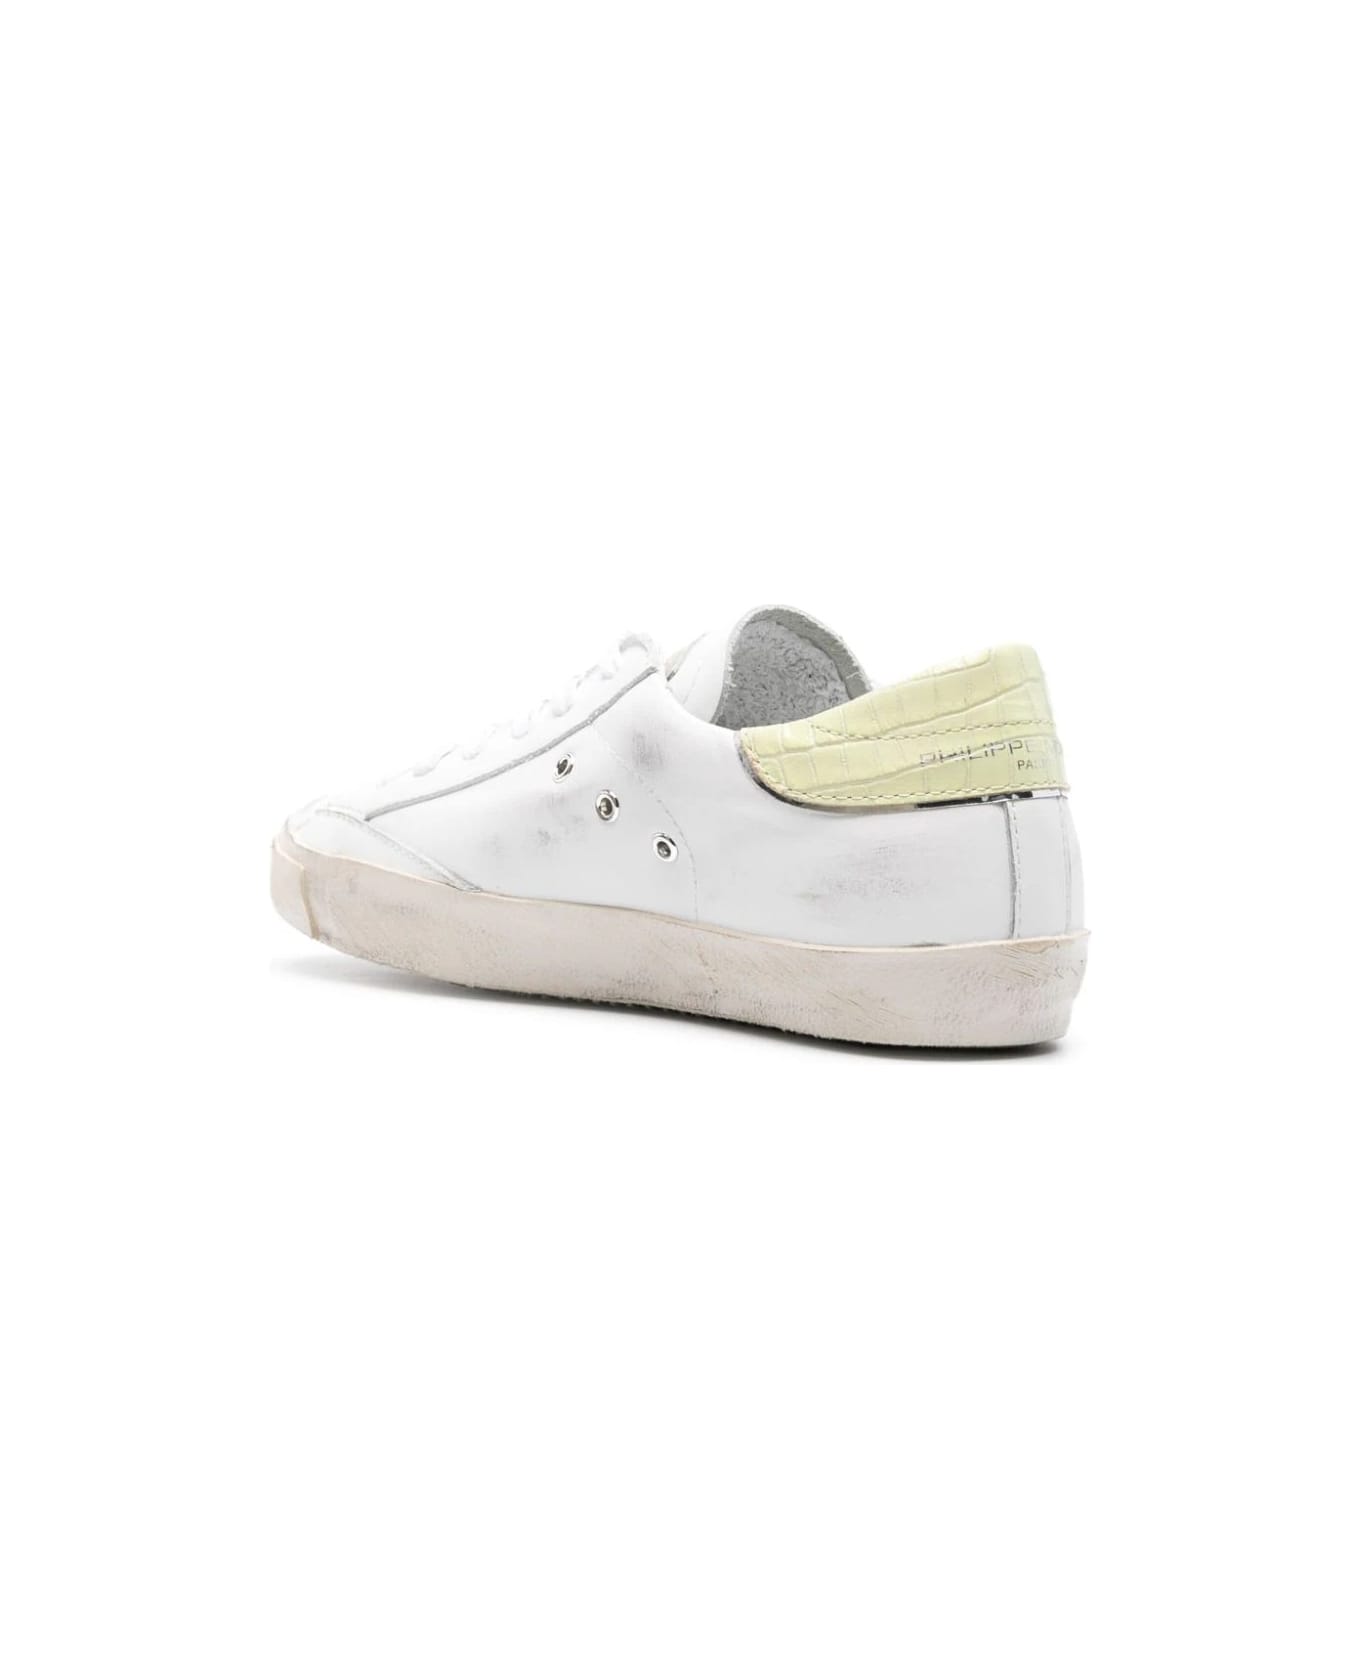 Philippe Model Prsx Low Sneakers - White And Yellow - White